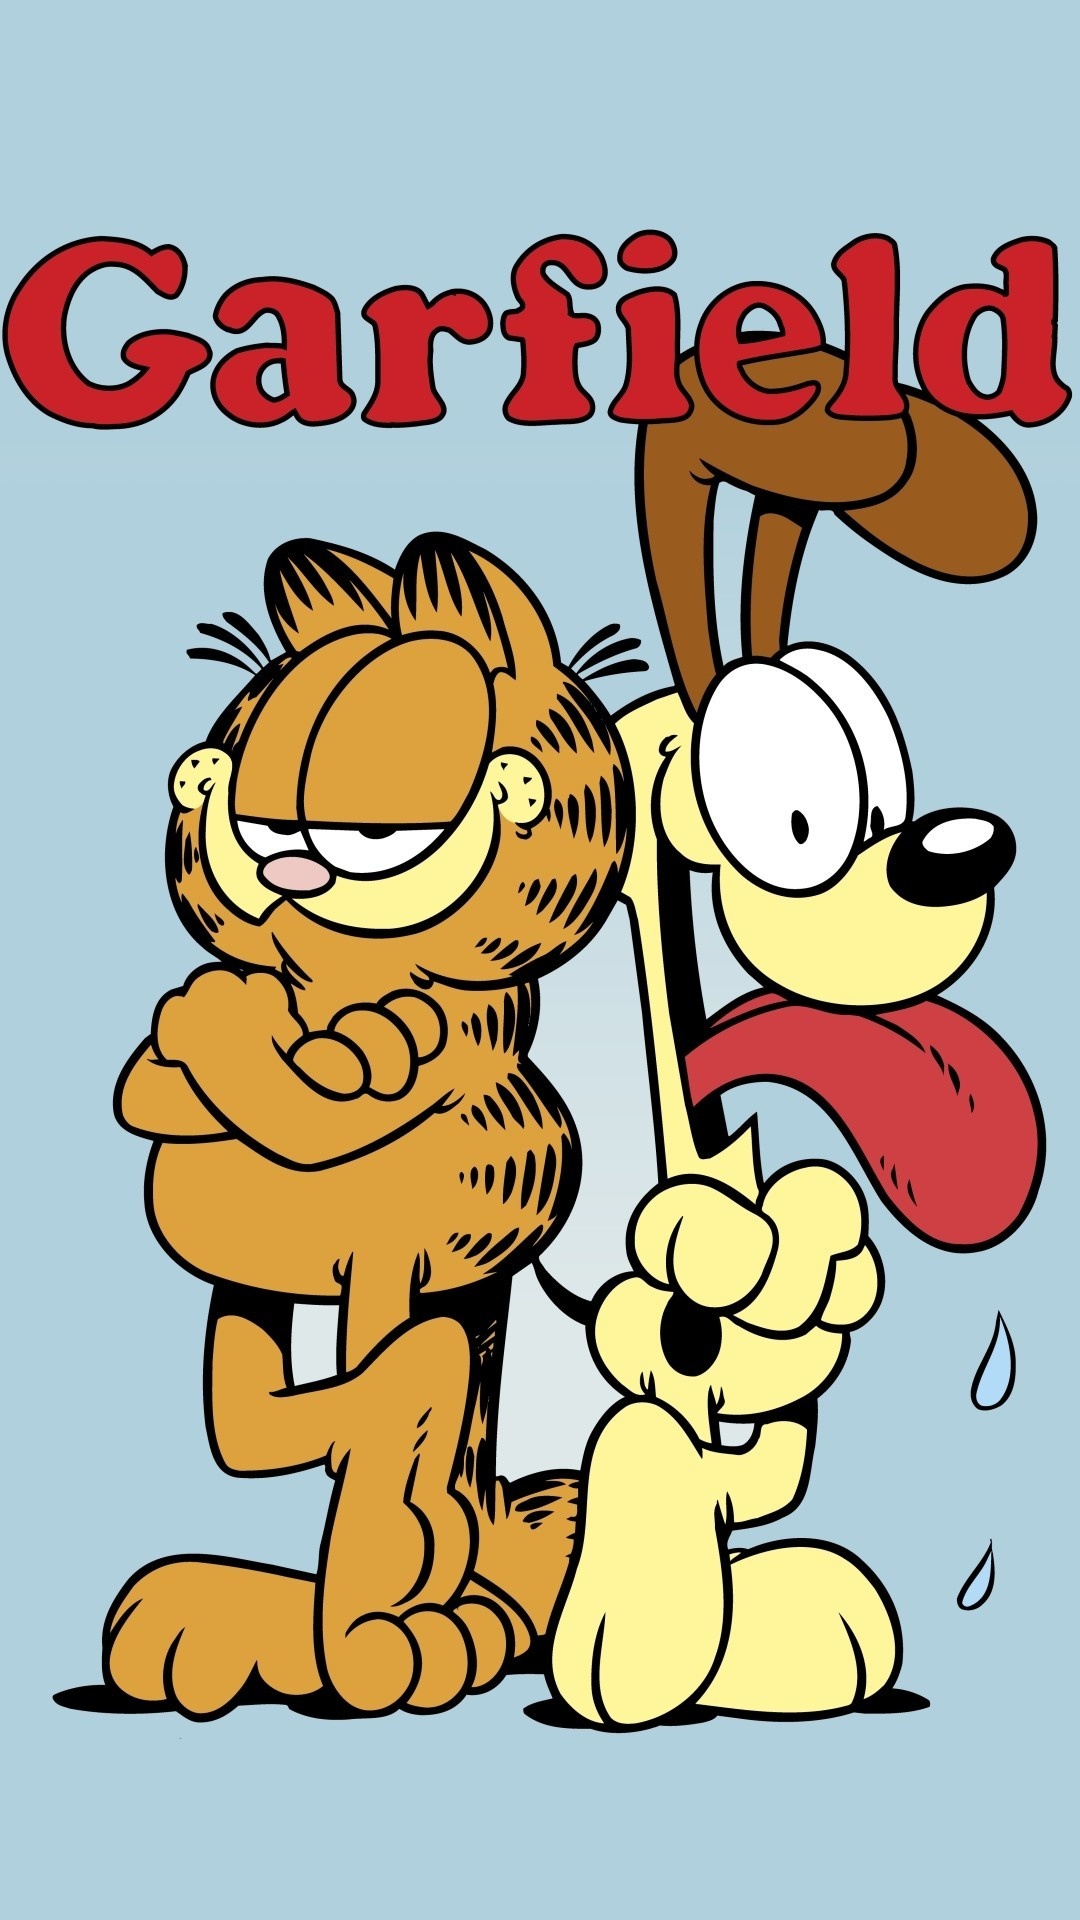 Garfield backgrounds, Assorted pictures, Vibrant collection, Creative expression, 1080x1920 Full HD Handy